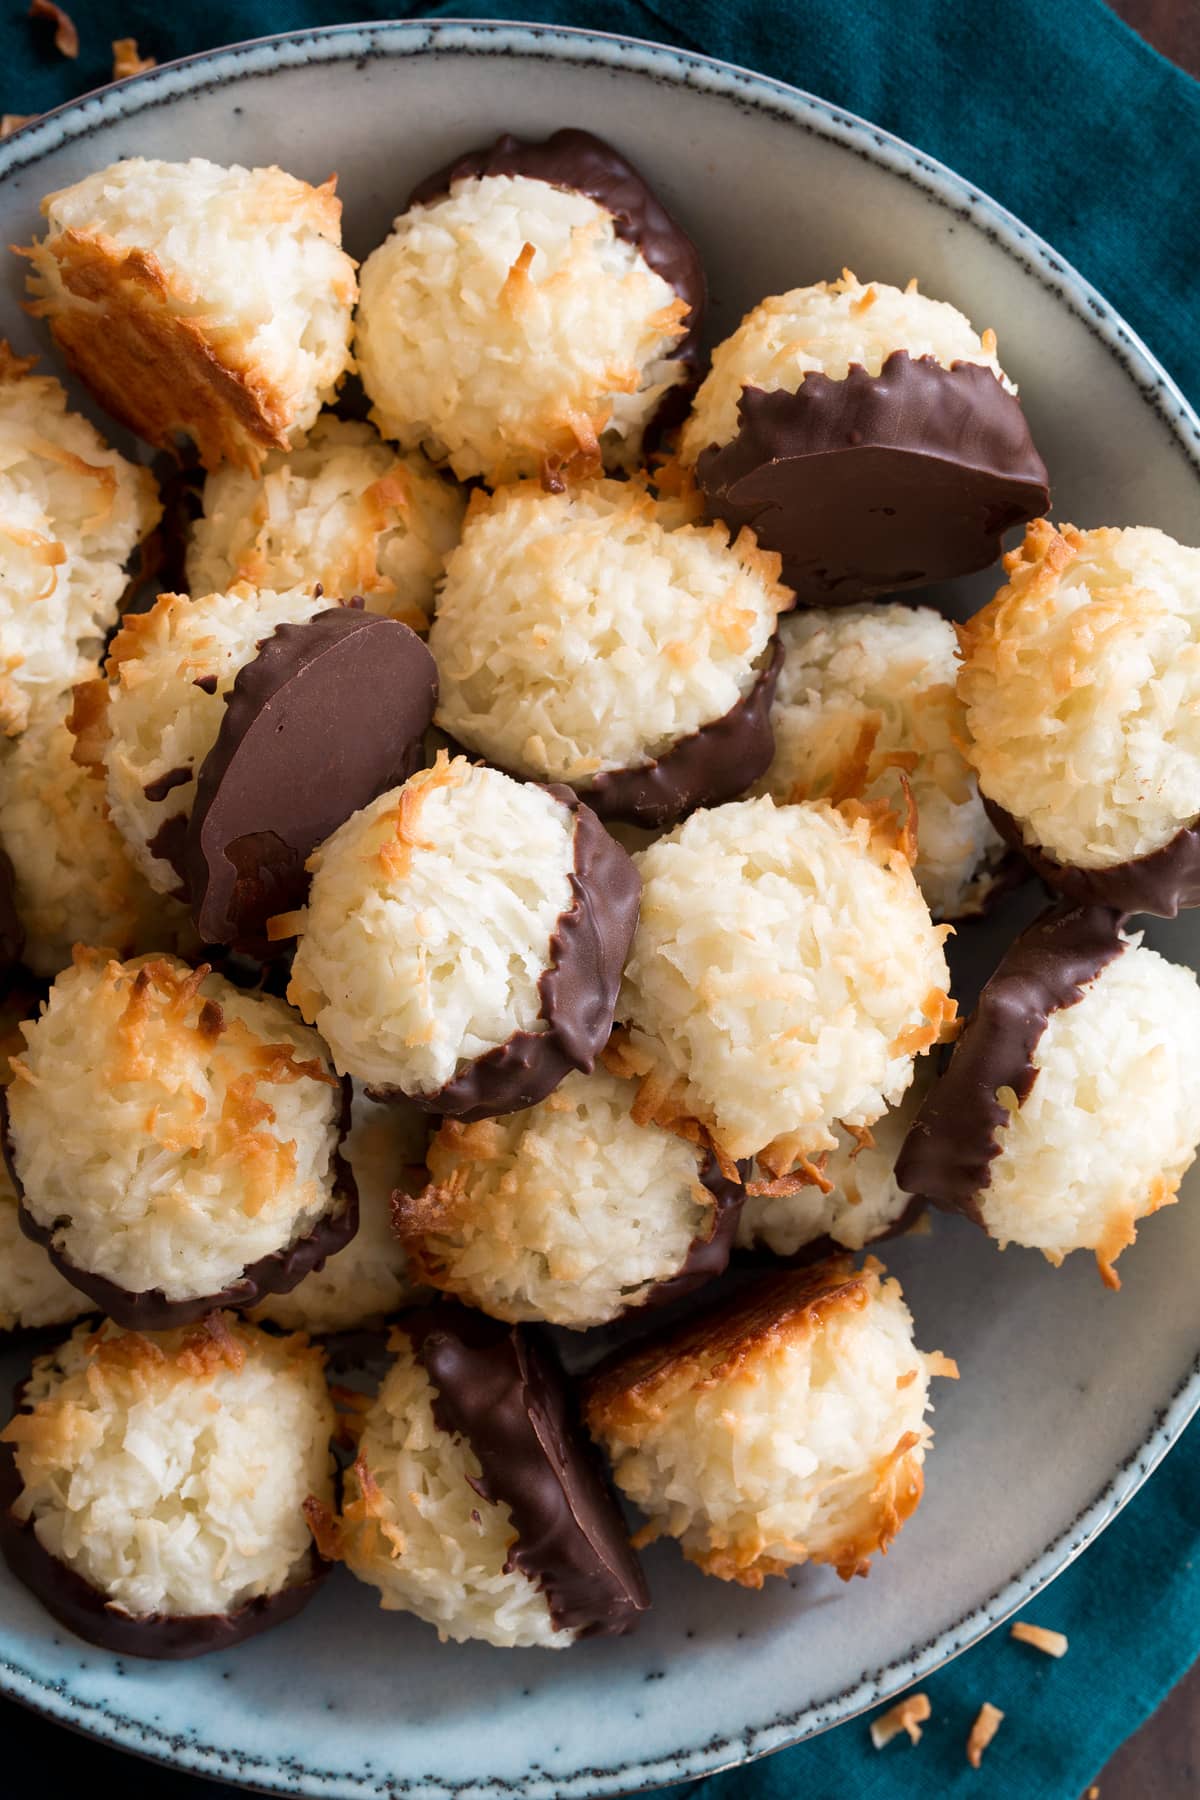 Coconut macaroons shown close up from above.